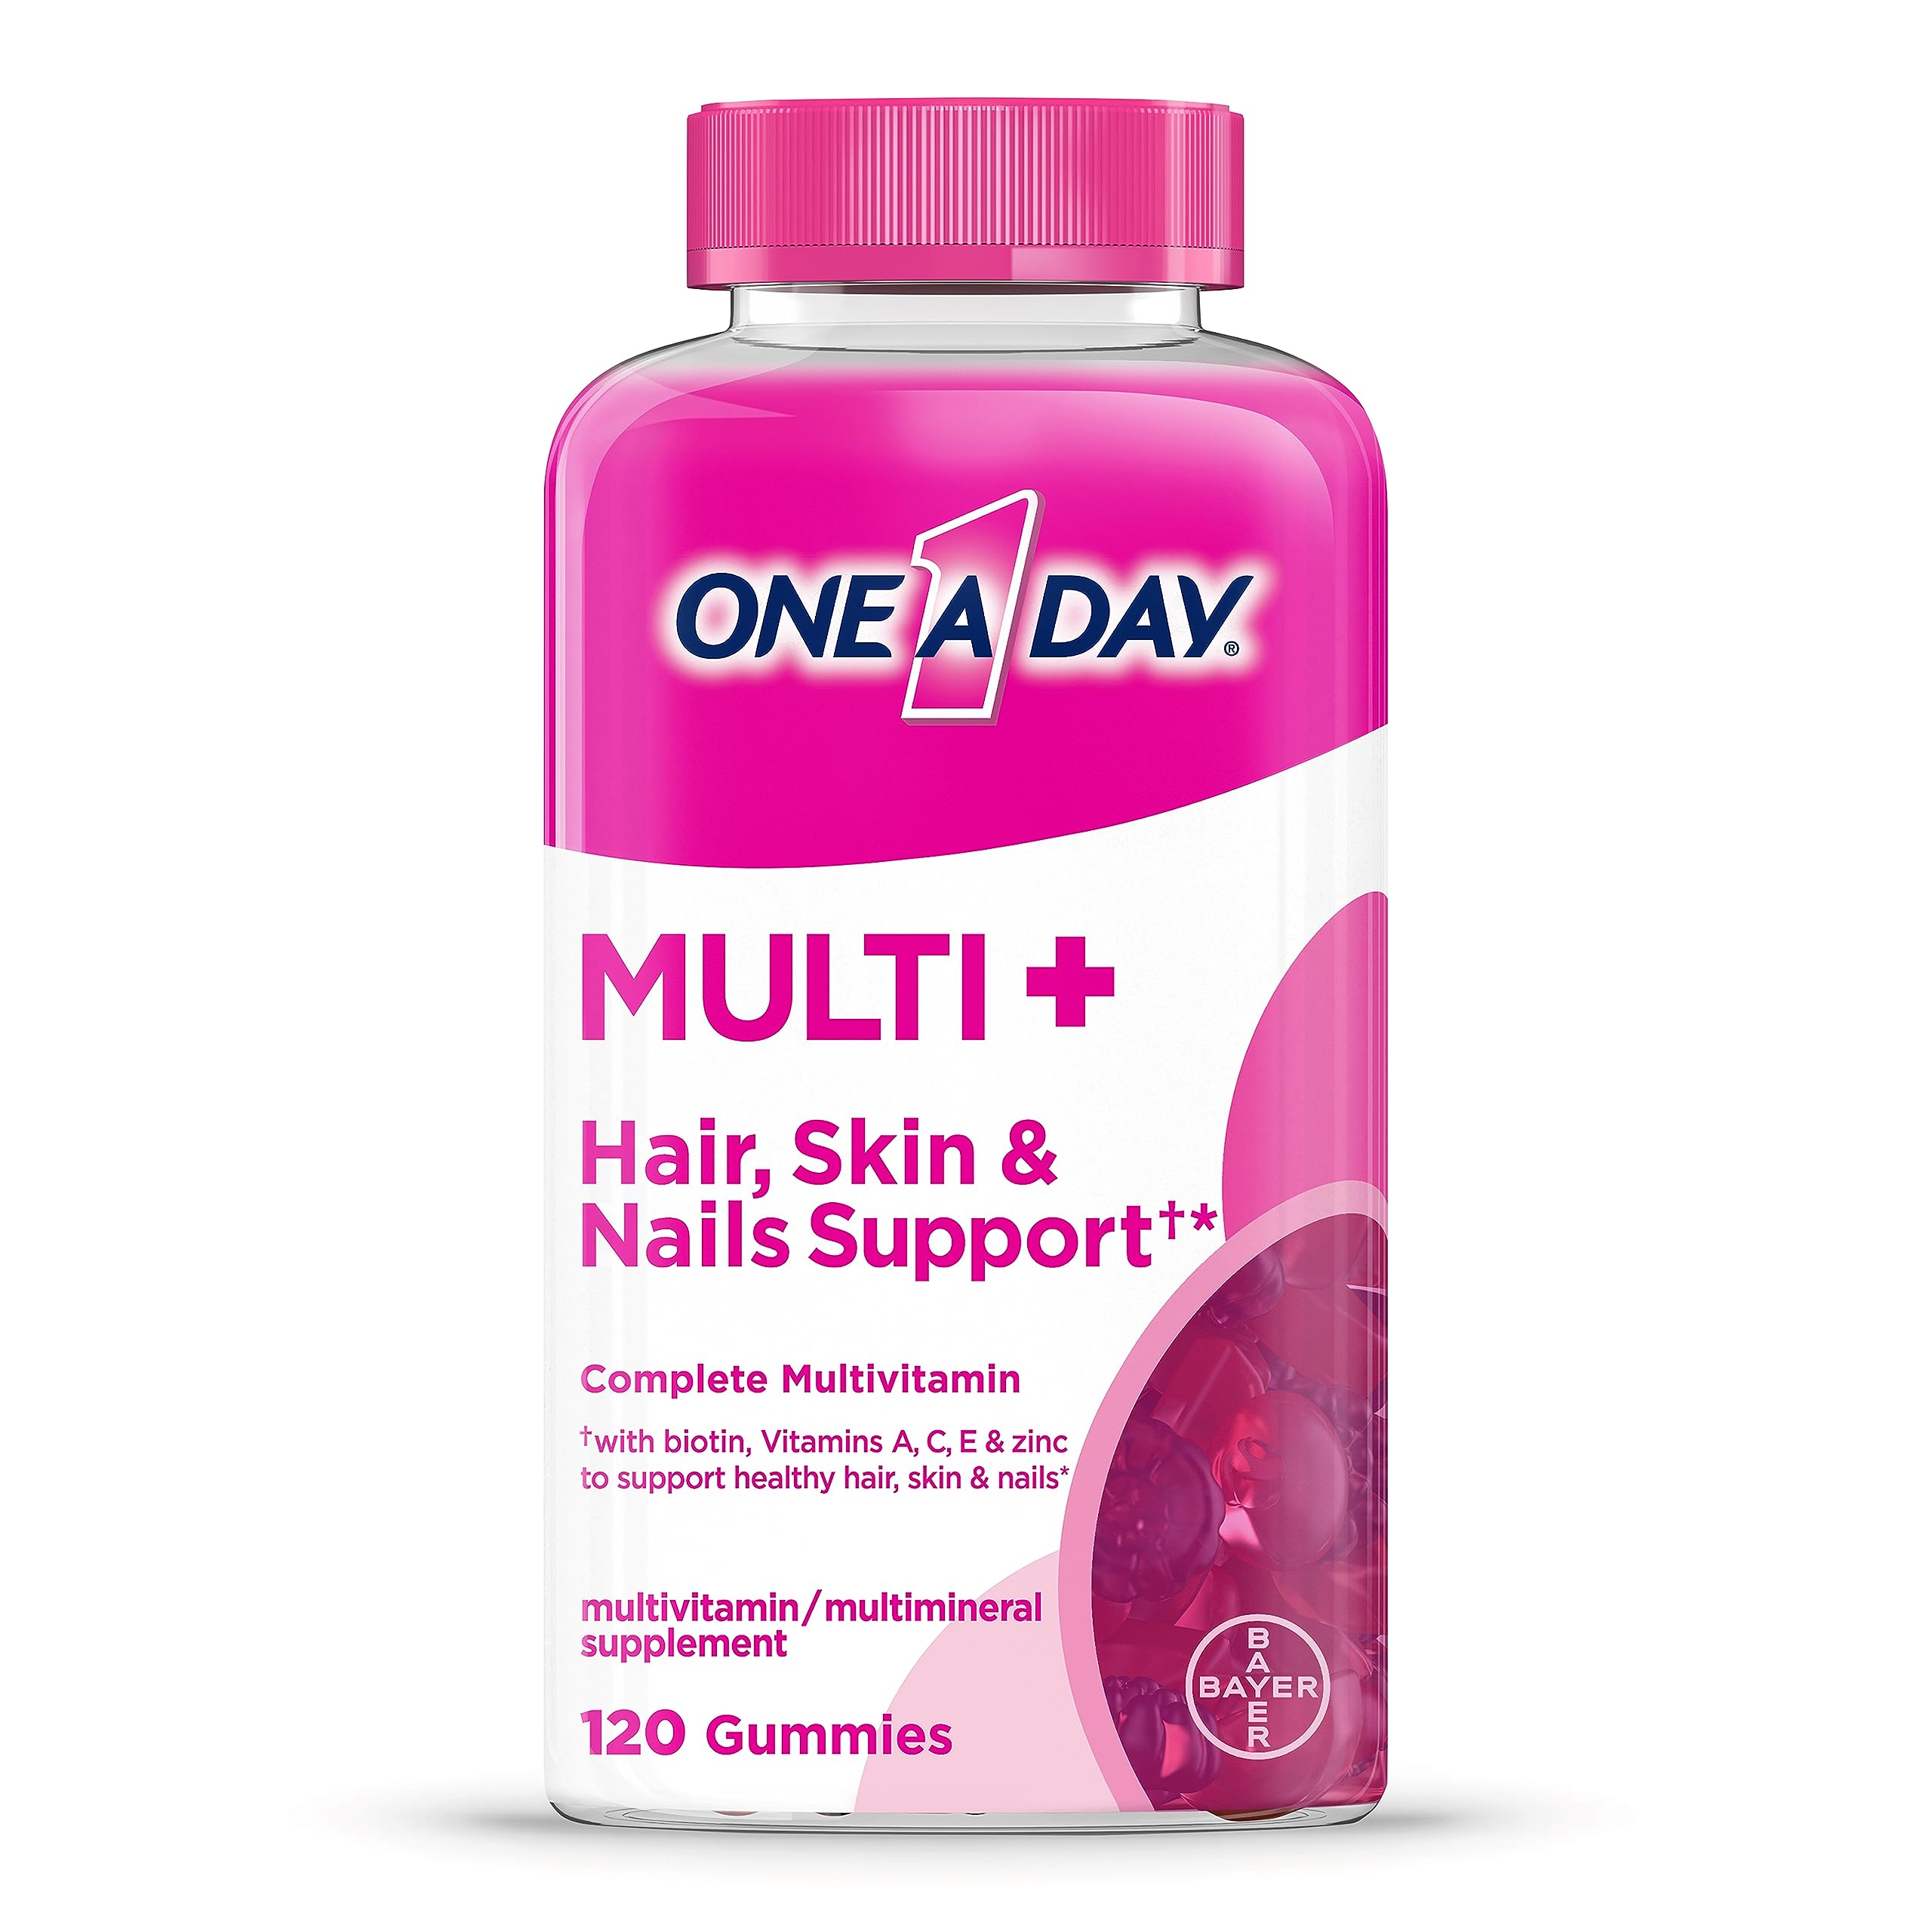 ONE A DAY Multi+ Hair, Skin & Nails, Multivitamin + Boost of Support for Healthy Hair, Skin & Nails with Biotin and Vitamins A, C, E & Zinc ,Gummy 120 Count (2 Month Supply)